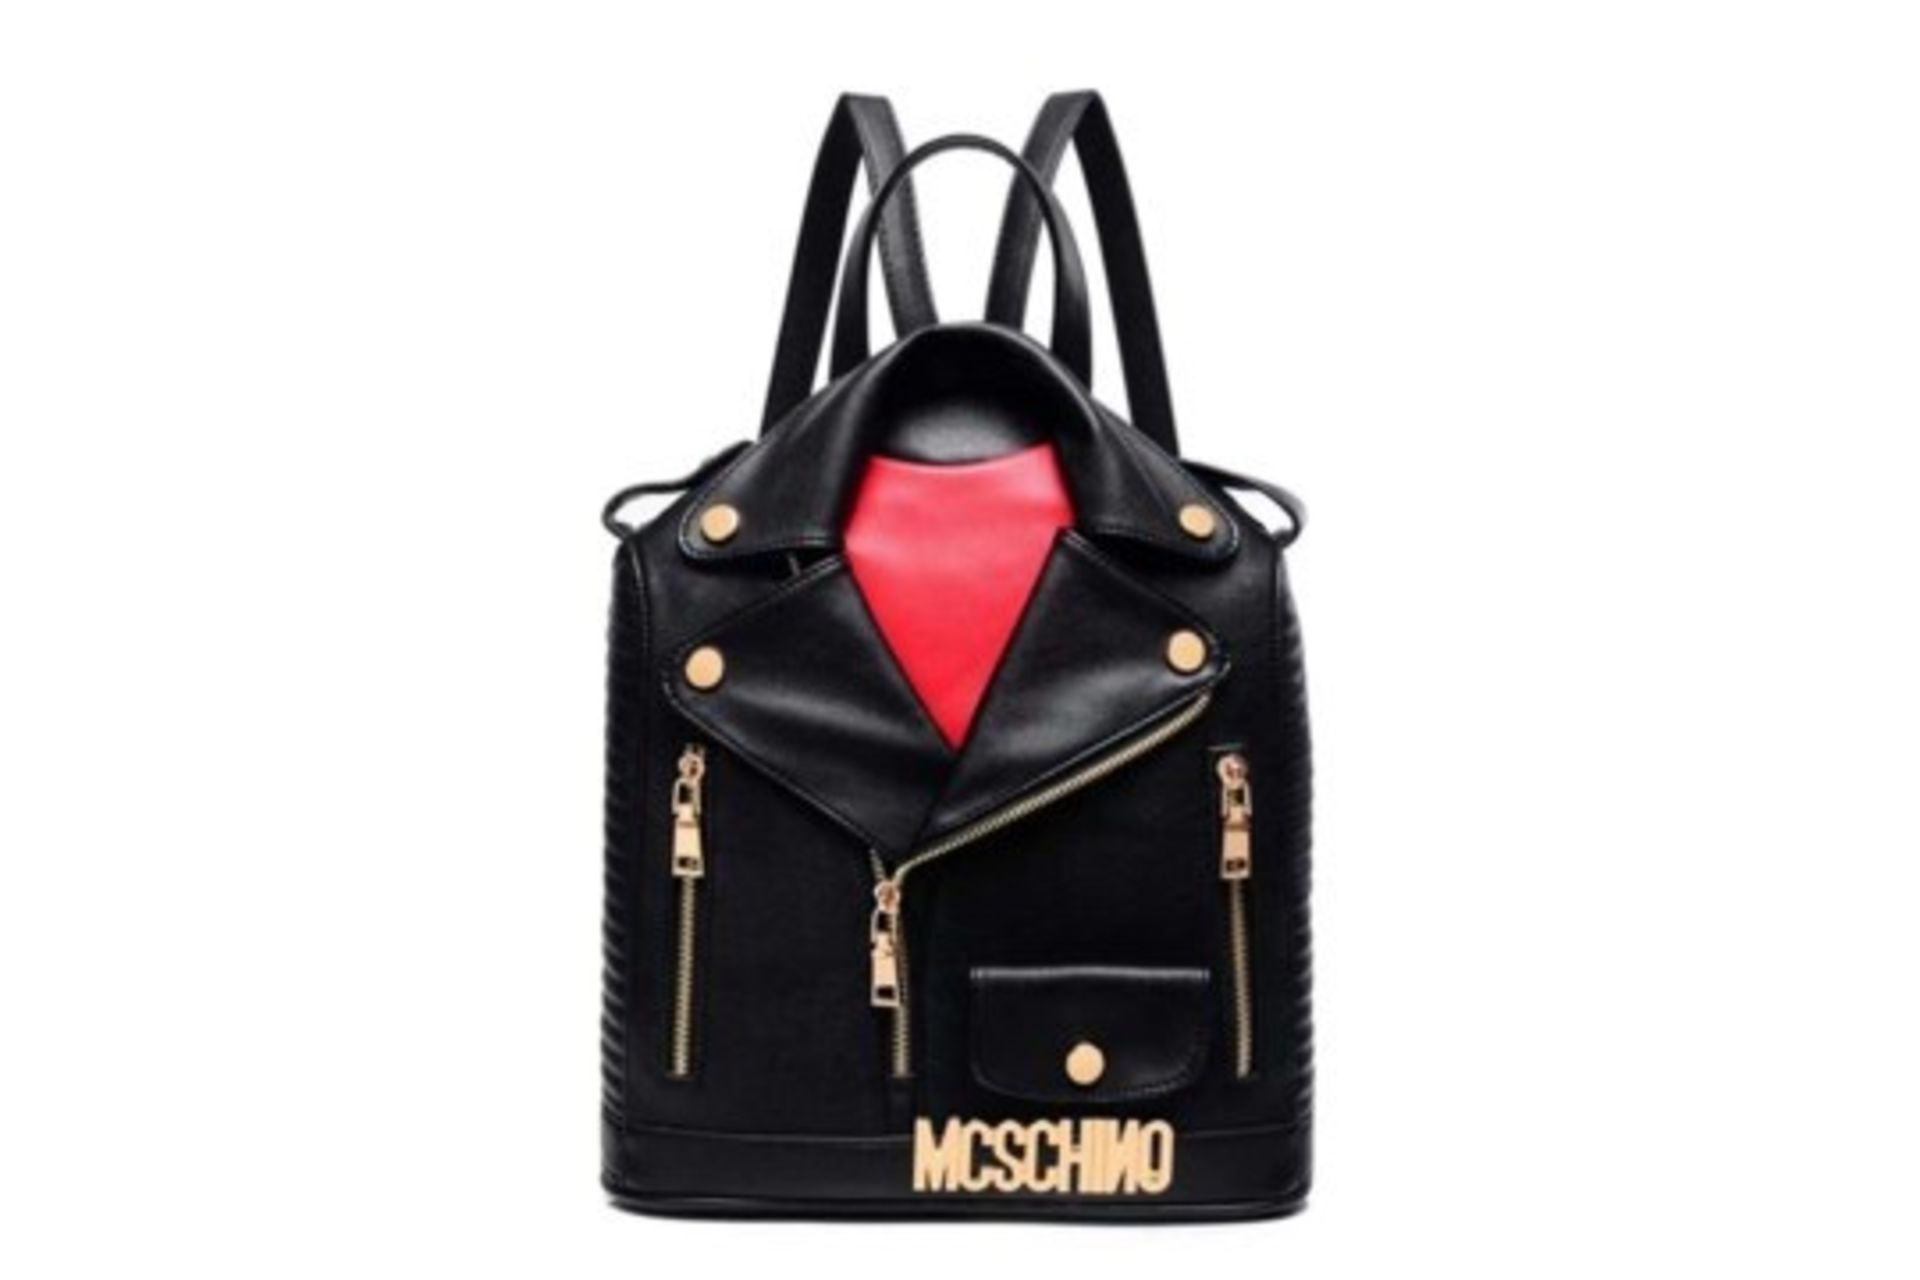 Brand New Moschino Style Leather Biker Jacket Ladies Backpacks RRP£64.99